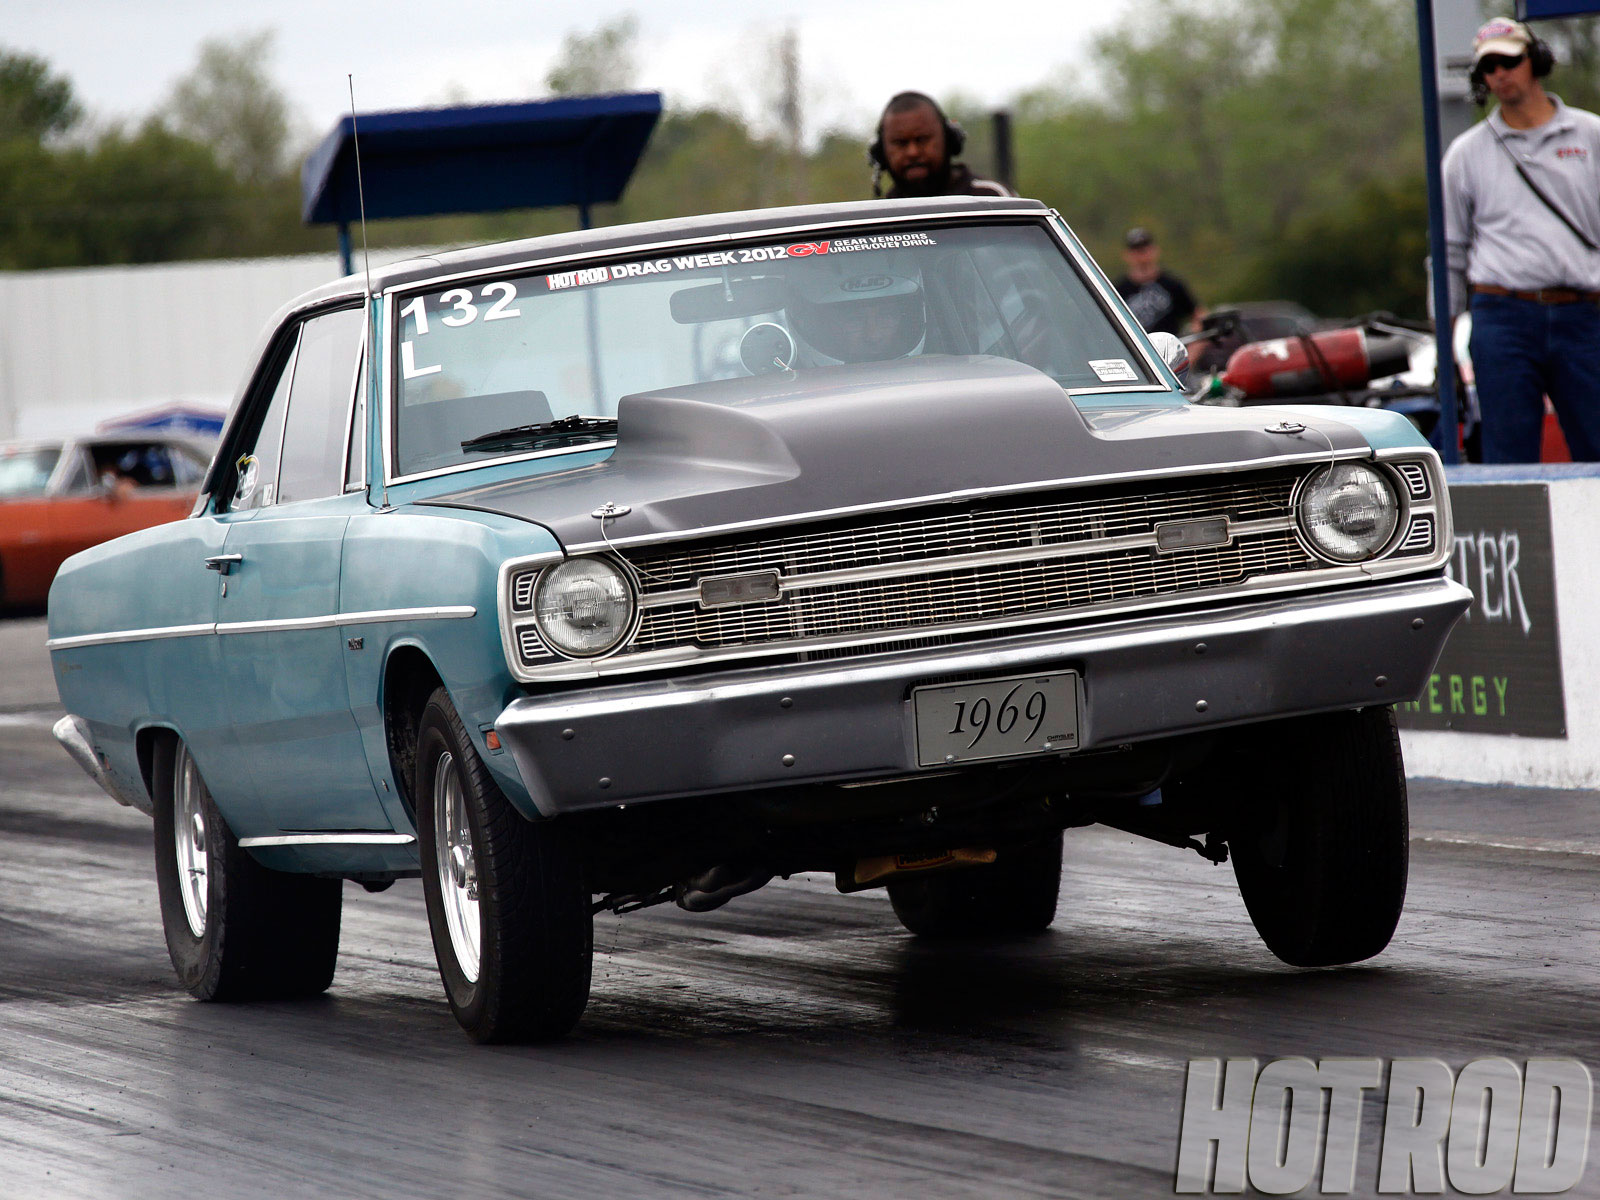 Attached picture 7461399-drag-week-2012-final-day-saturday-tulsa-7520.jpg